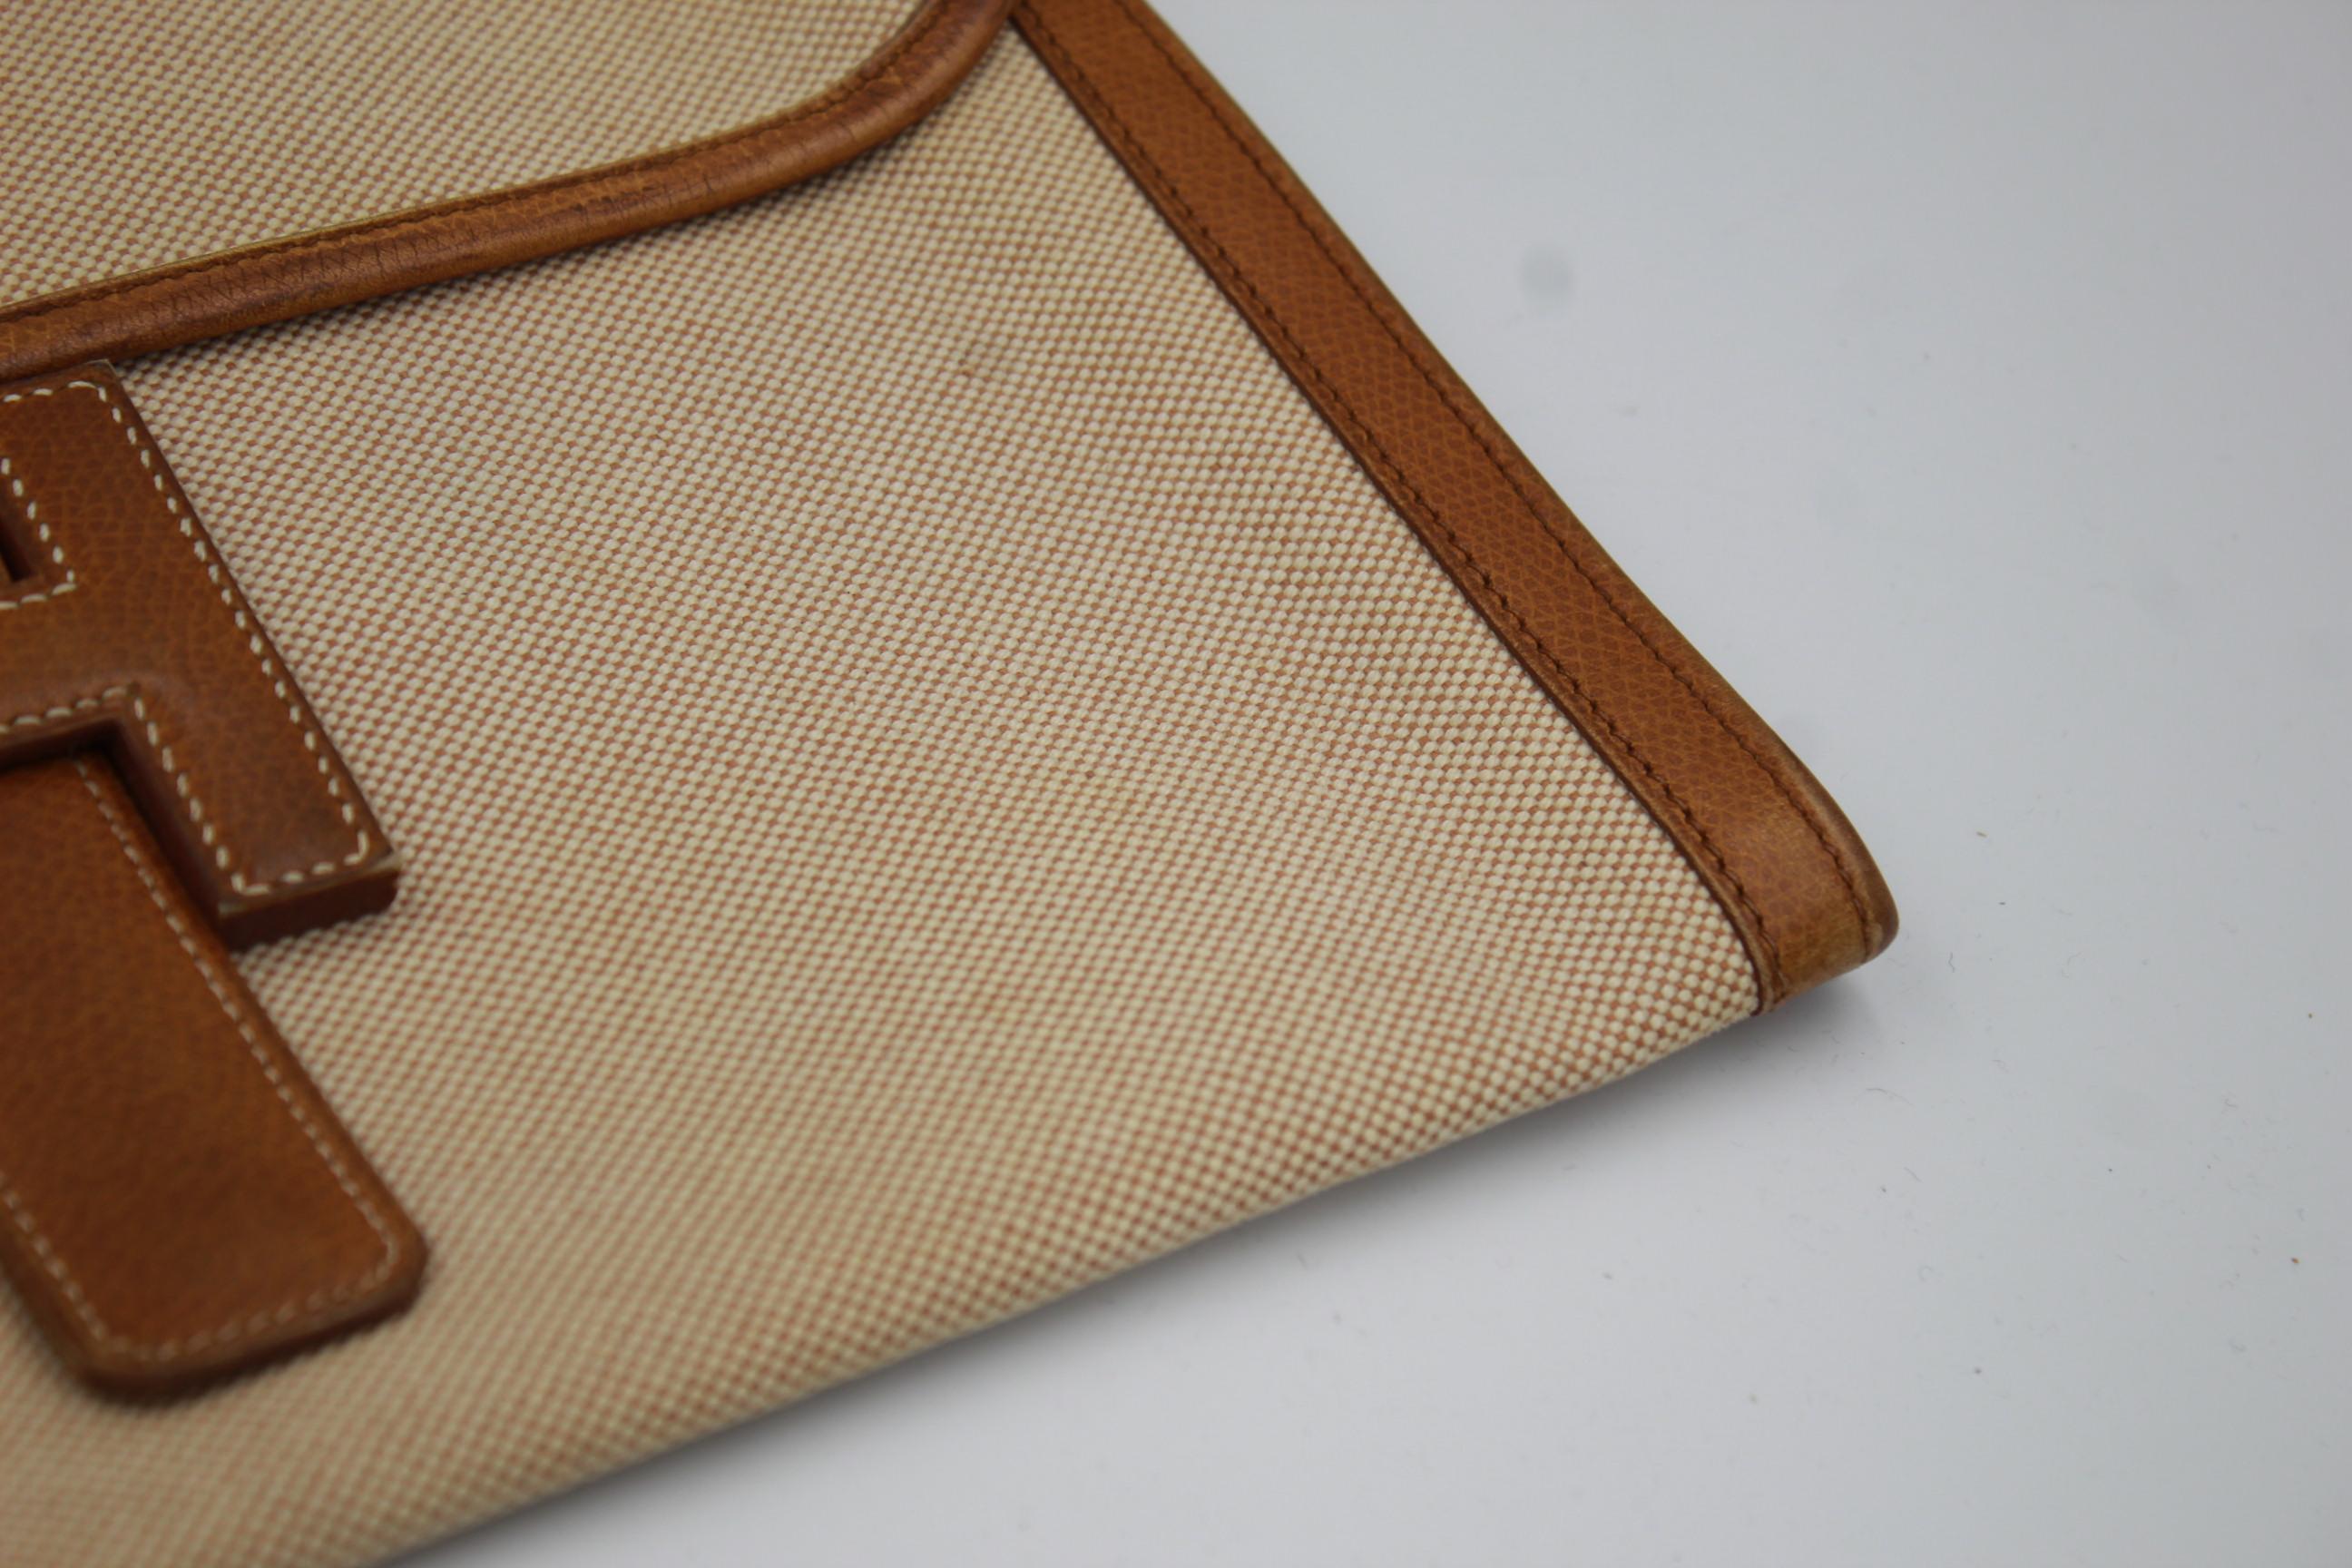 Women's or Men's Vintage Hermes Jige MM Clutch in Canvas and Leather.